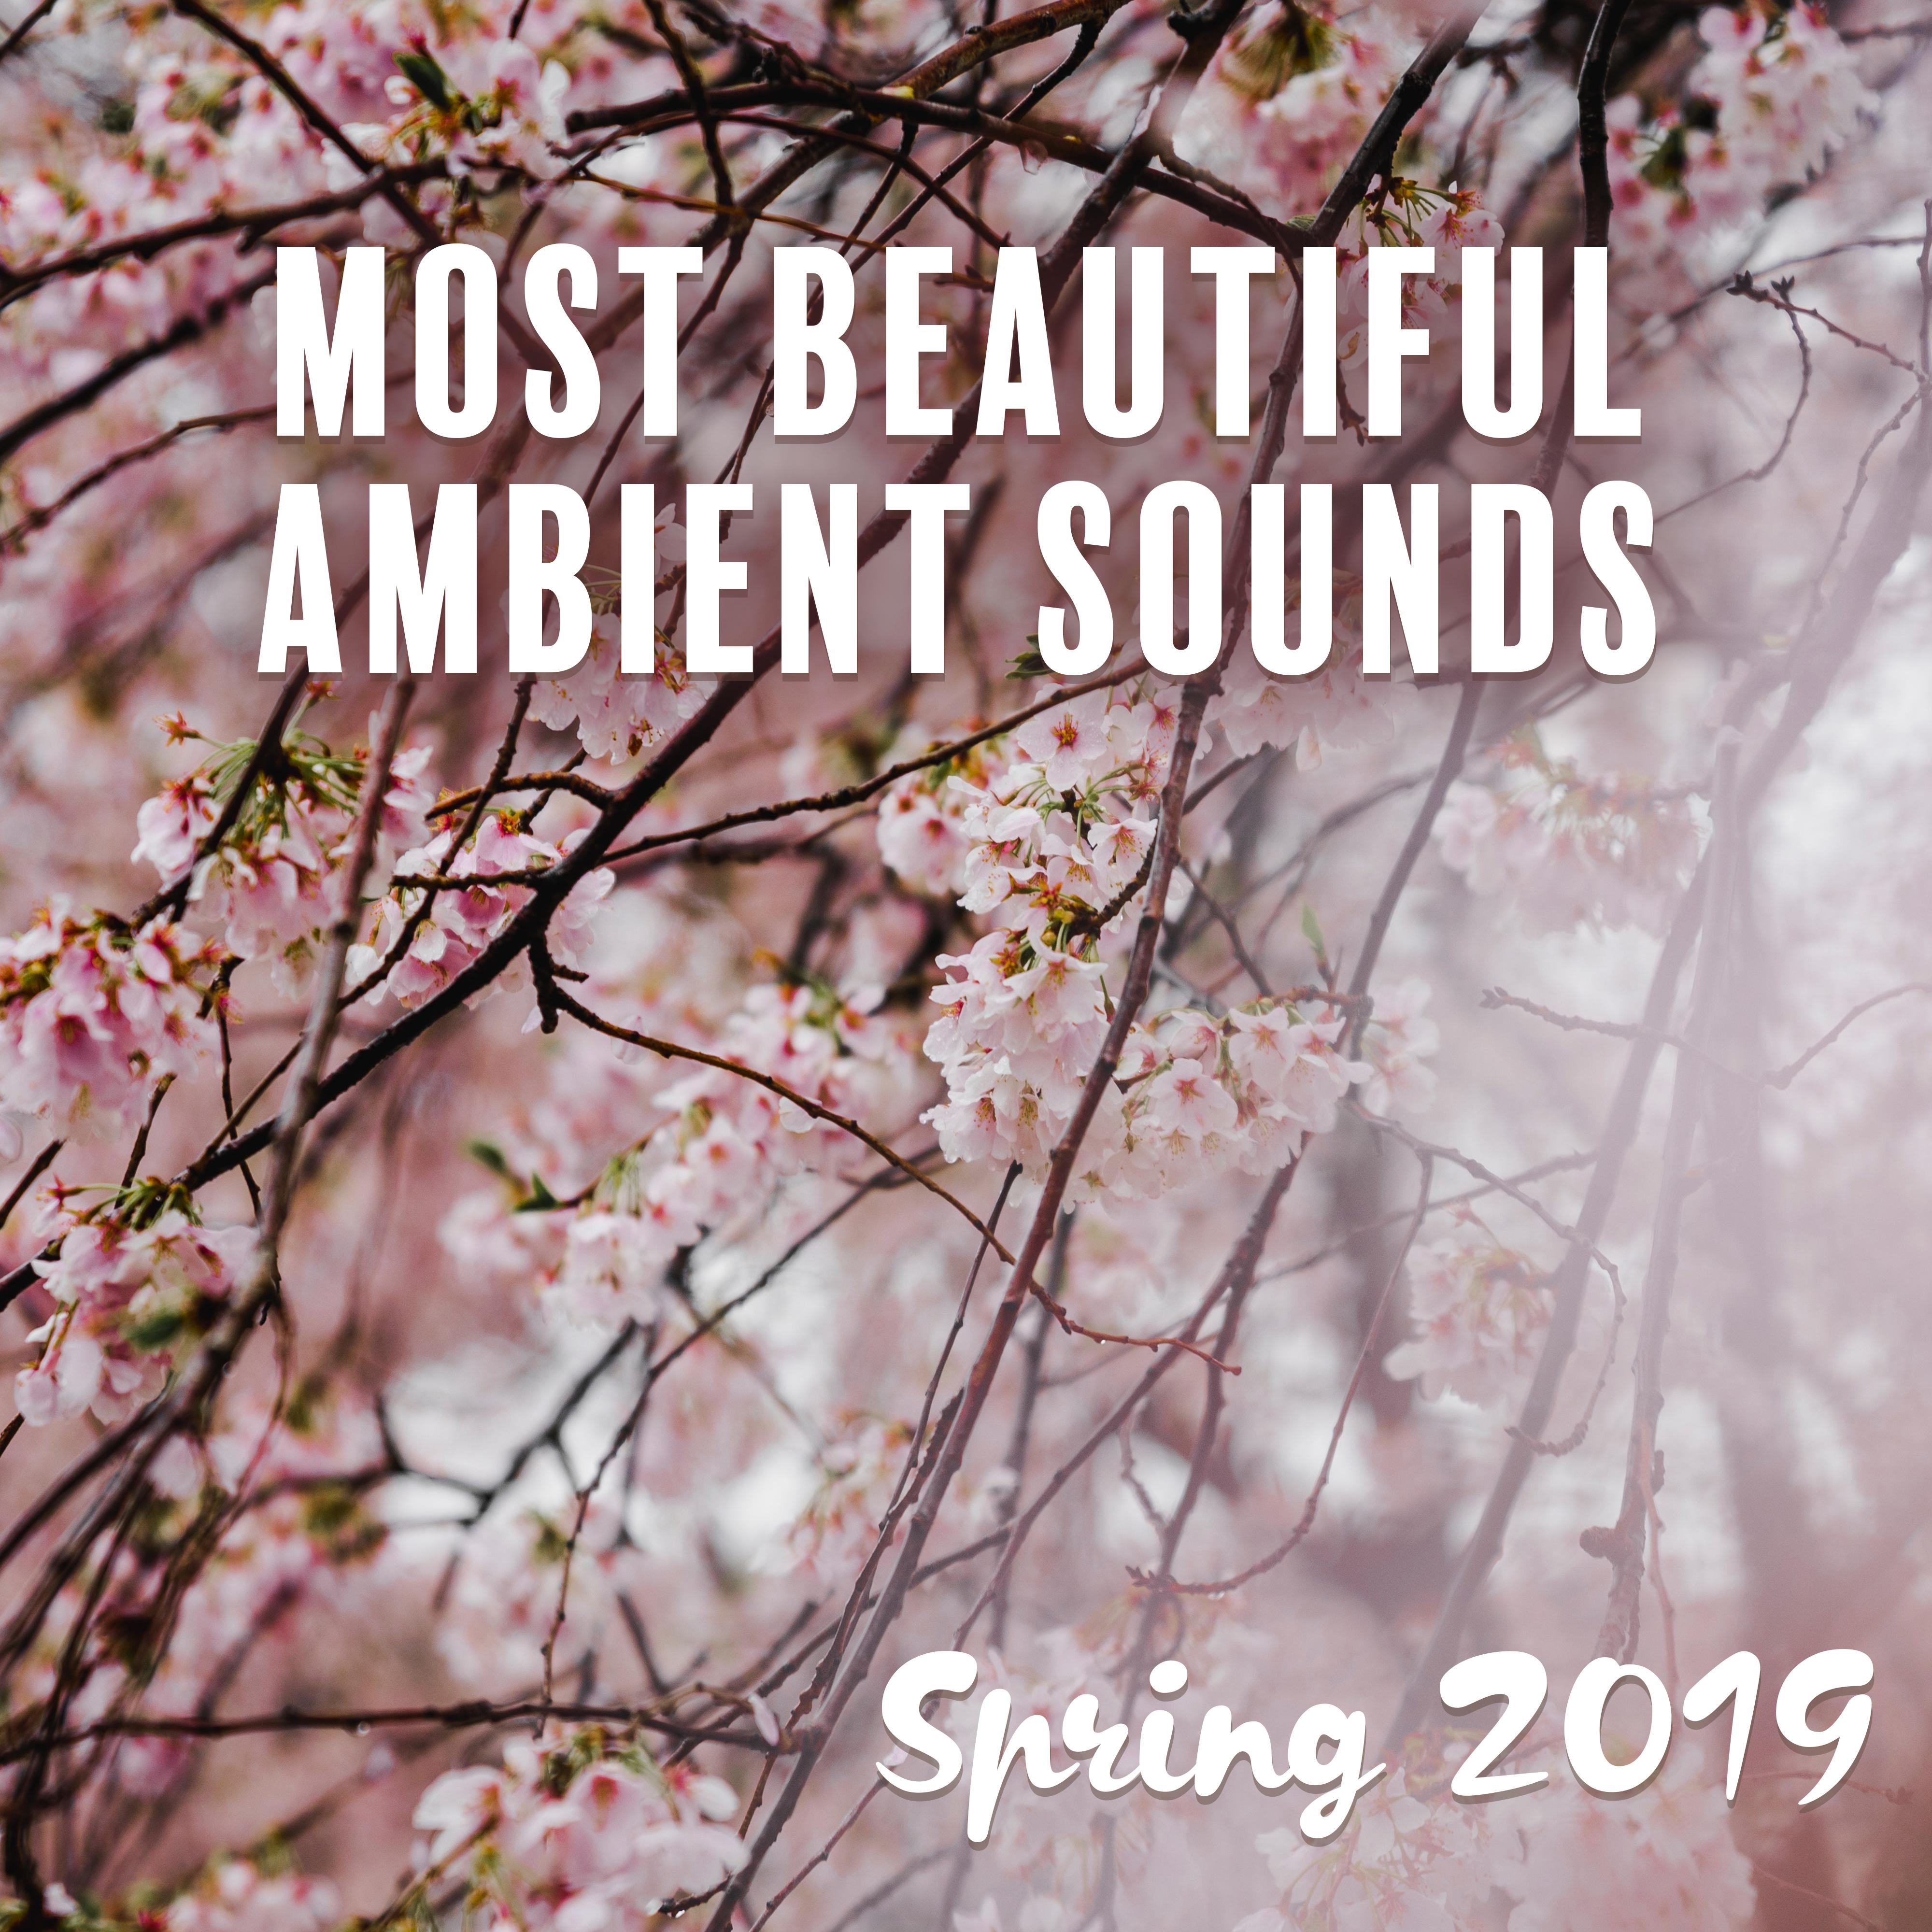 Most Beautiful Ambient Sounds: Spring 2019